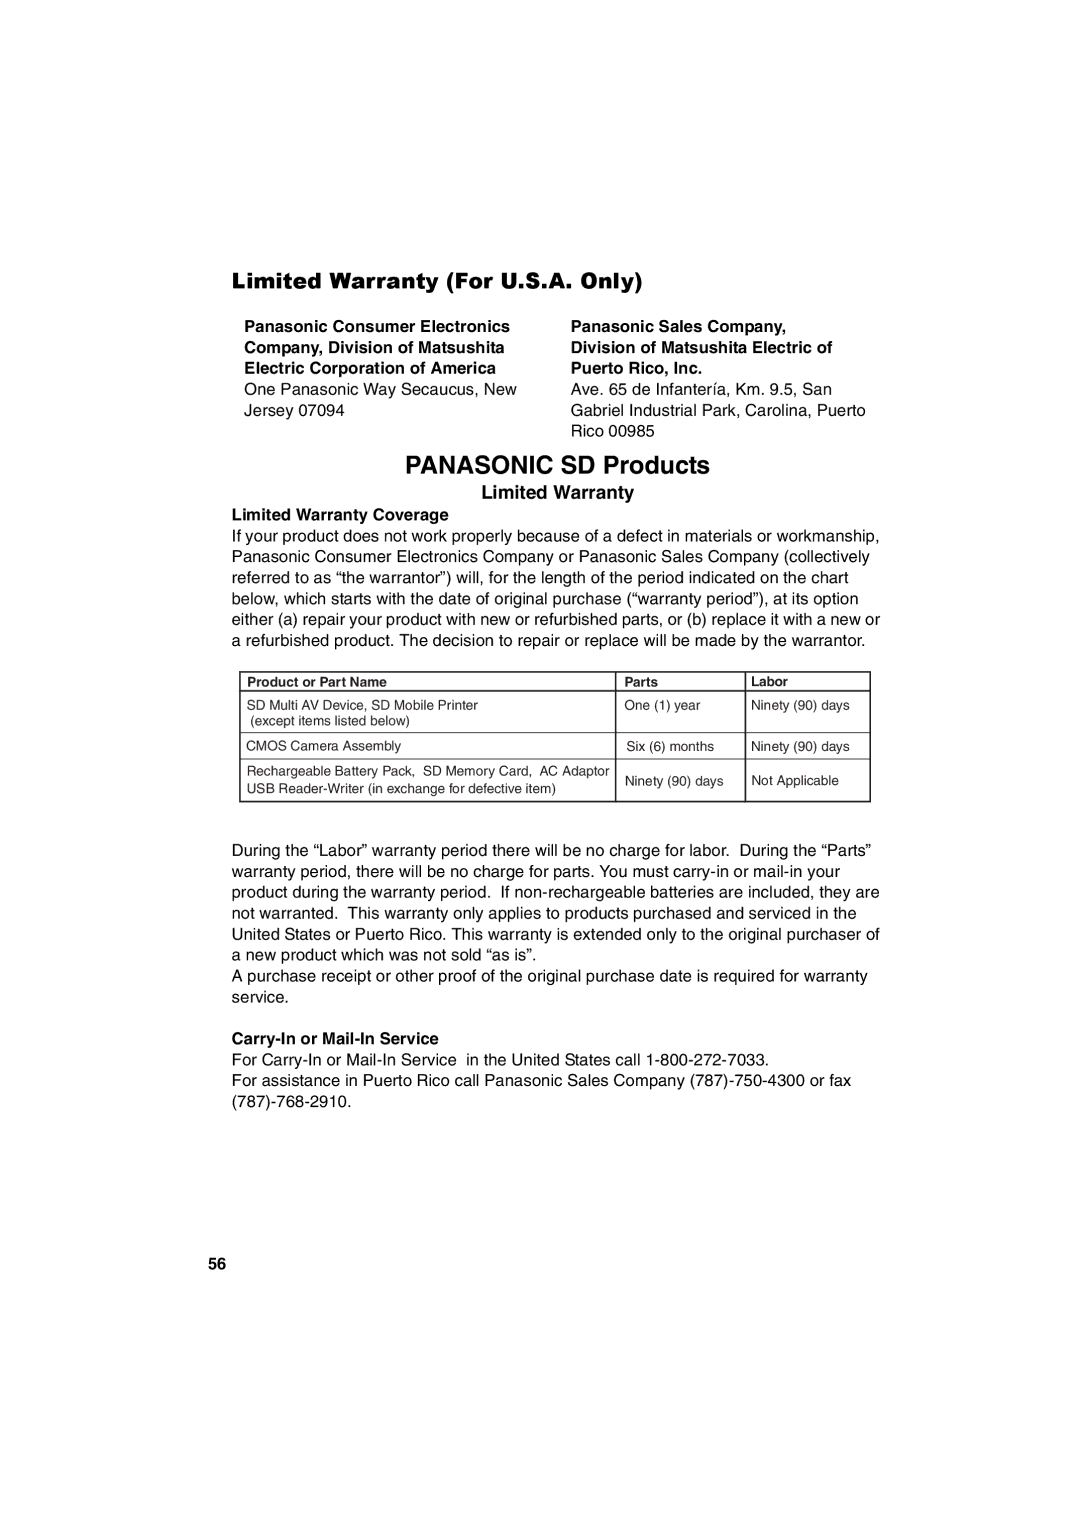 Panasonic SV-P20U manual Limited Warranty For U.S.A. Only, Limited Warranty Coverage, Carry-In or Mail-In Service 